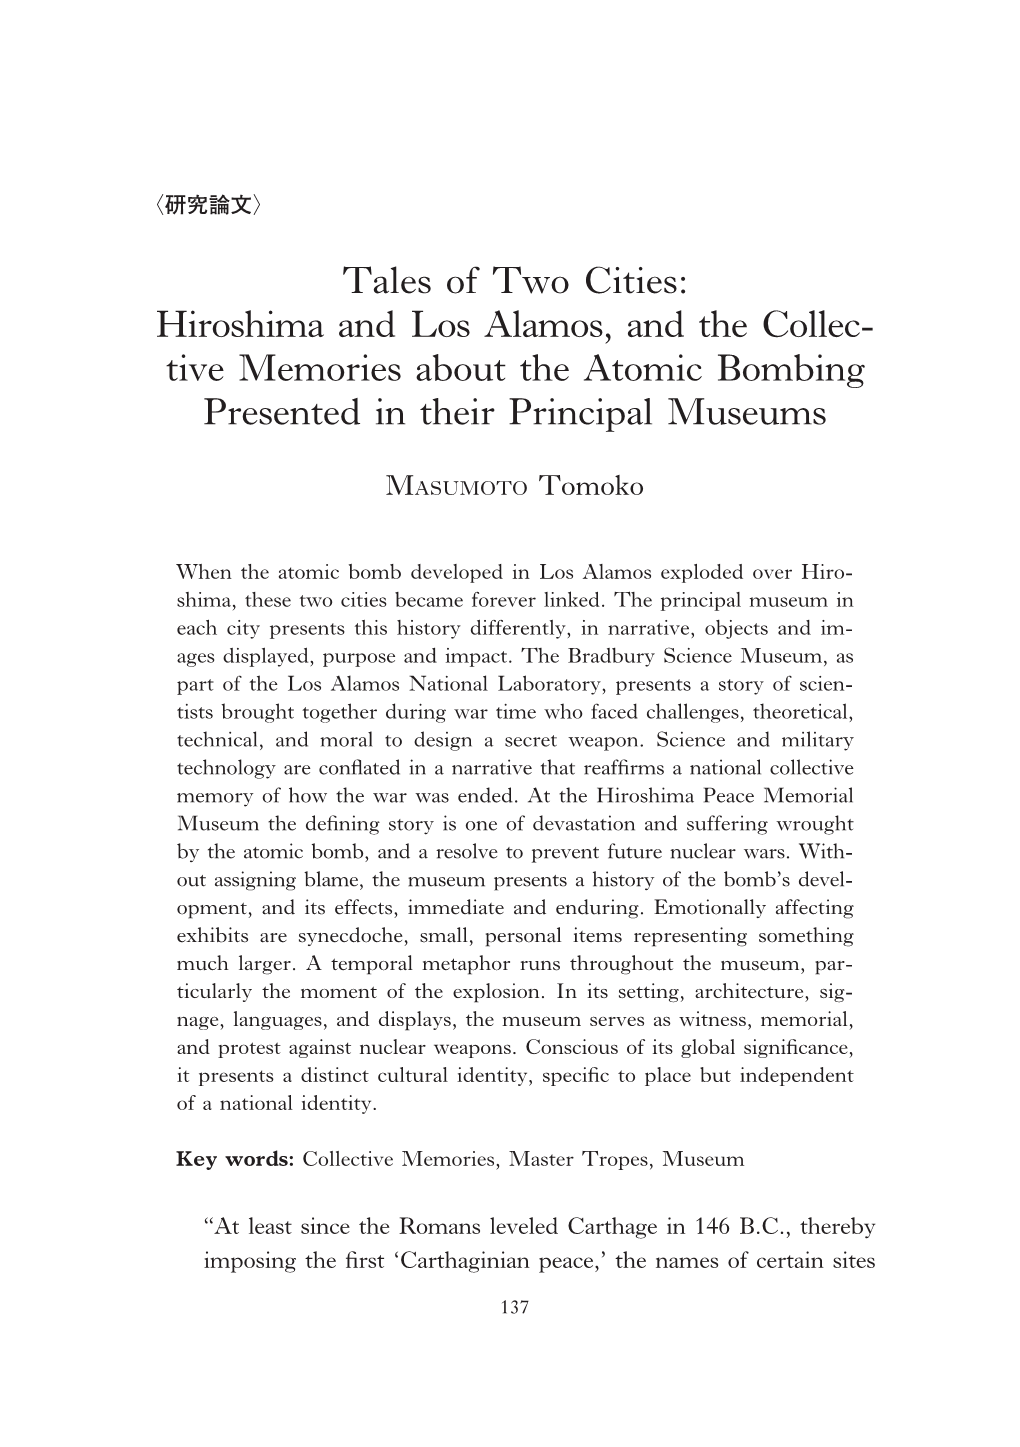 Tales of Two Cities: Hiroshima and Los Alamos, and the Collec- Tive Memories About the Atomic Bombing Presented in Their Principal Museums